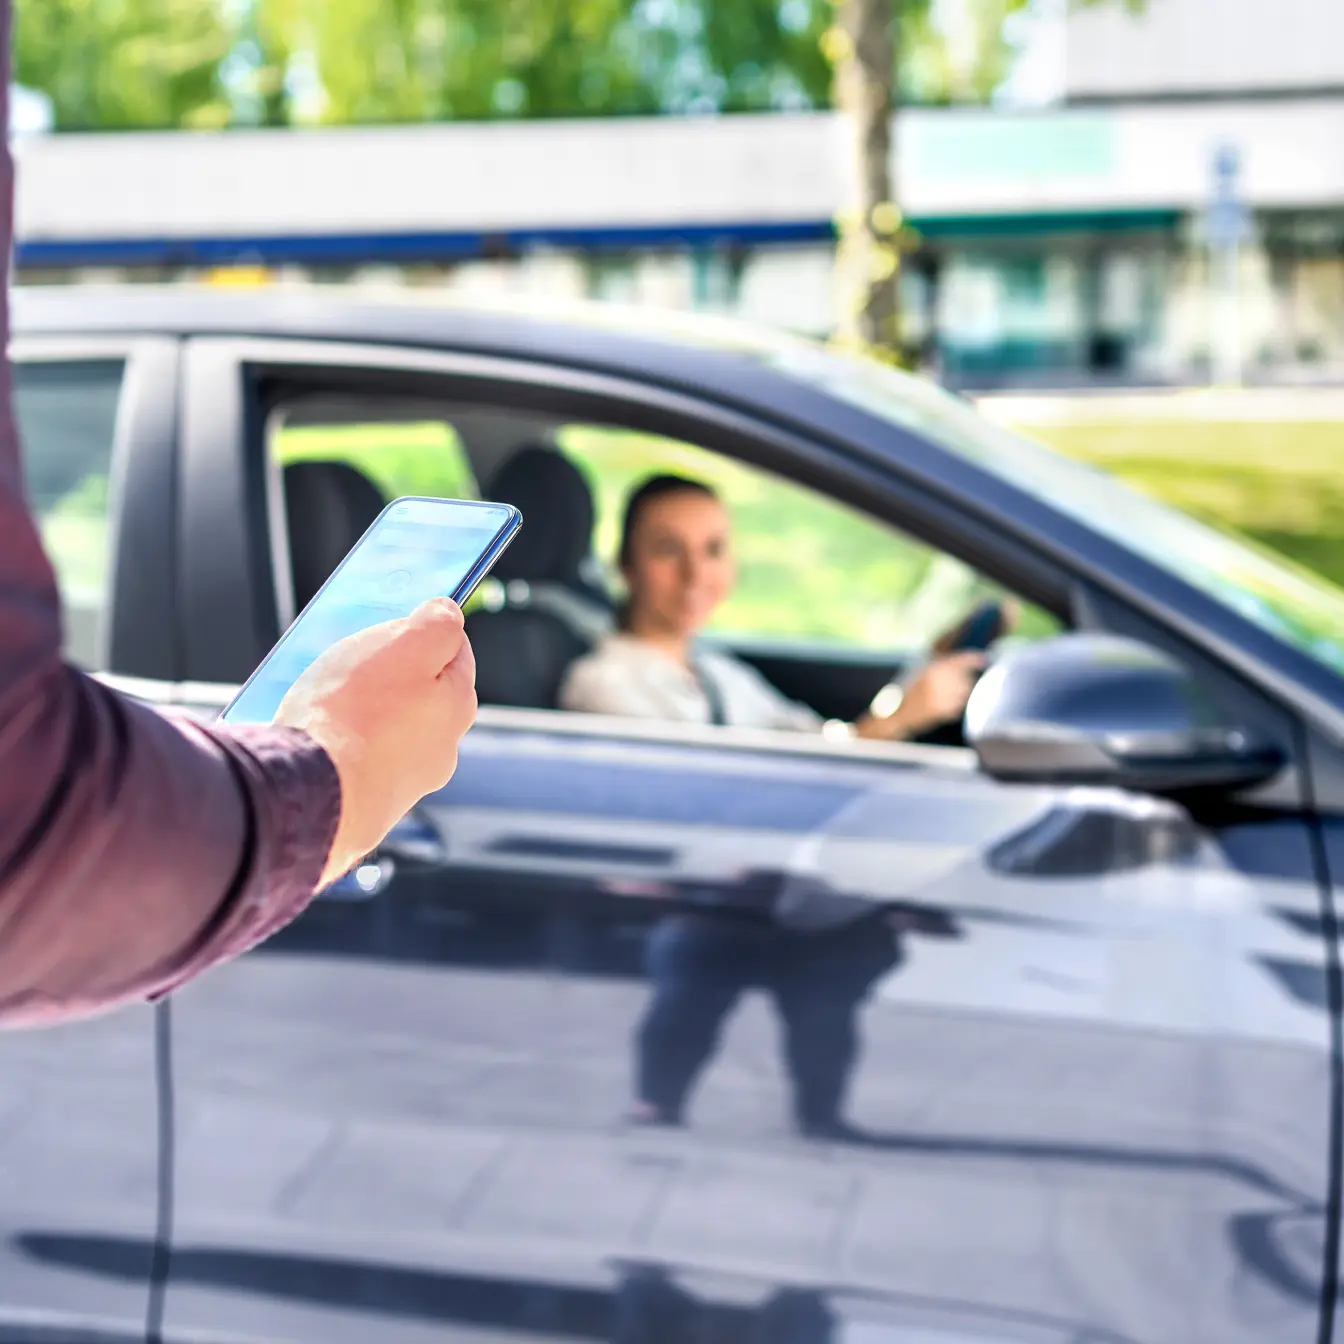 Man with phone in hand with woman driving a car in the background